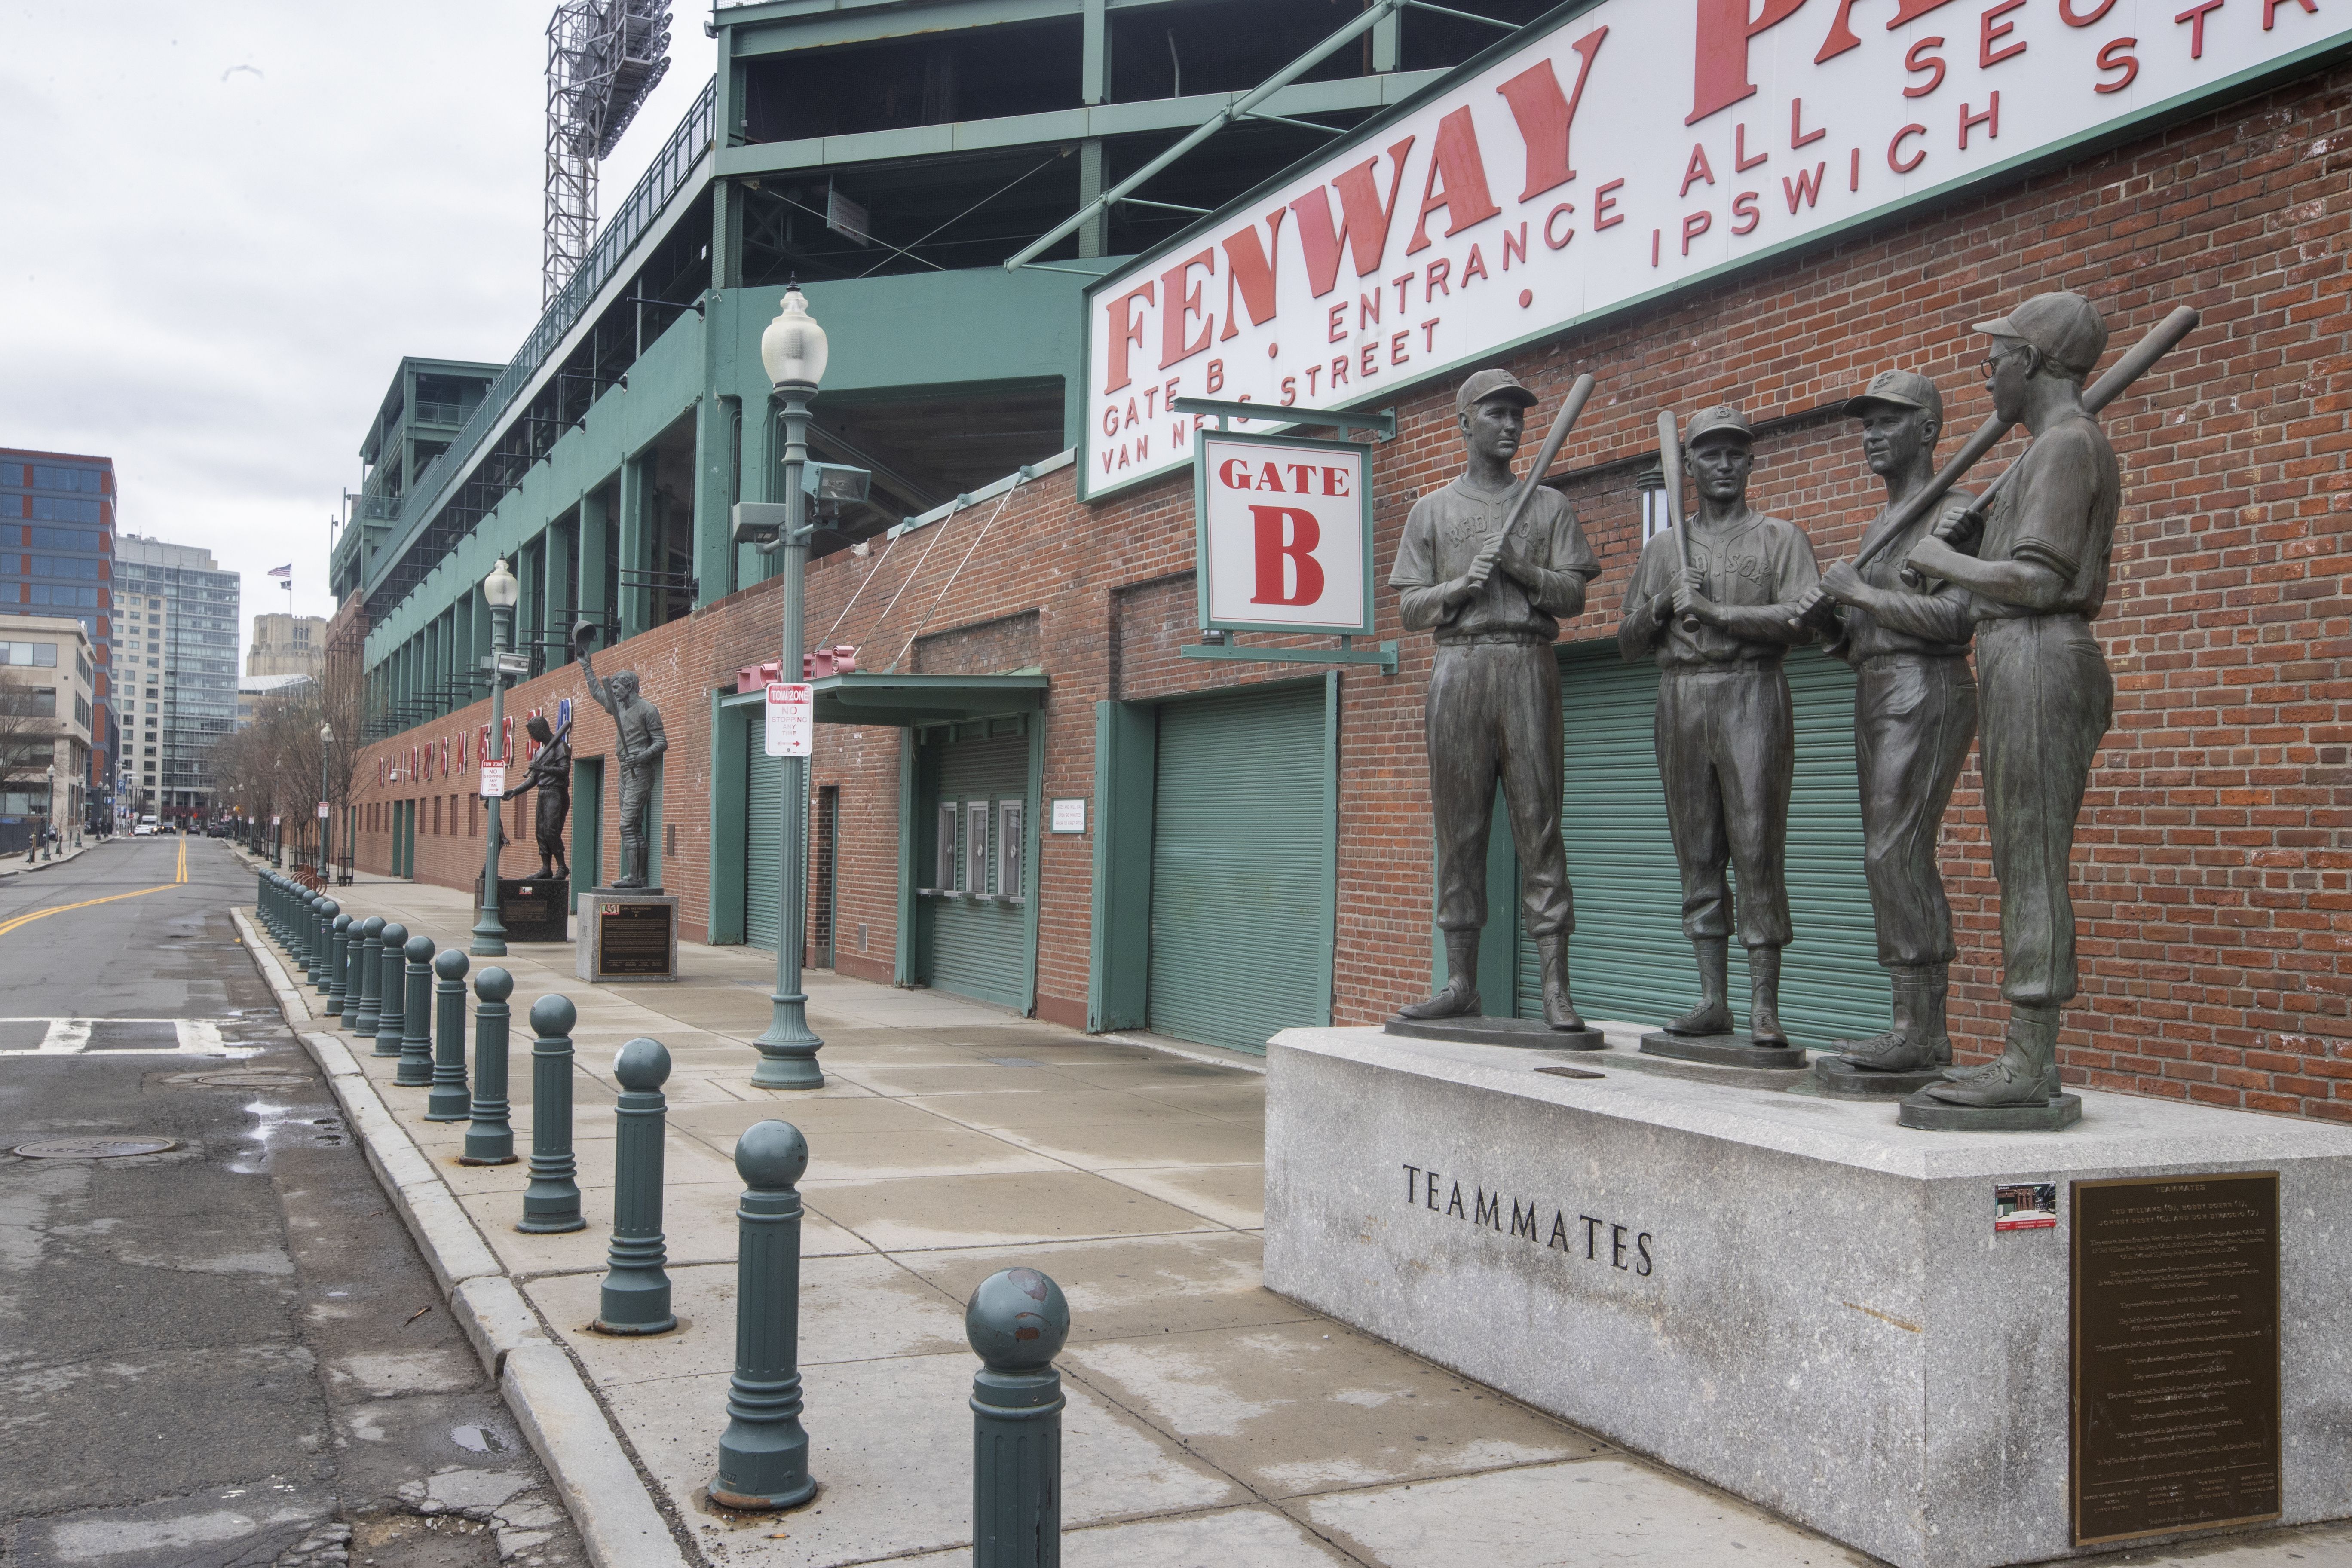 On what would have been Opening Day, sounds of silence at Fenway